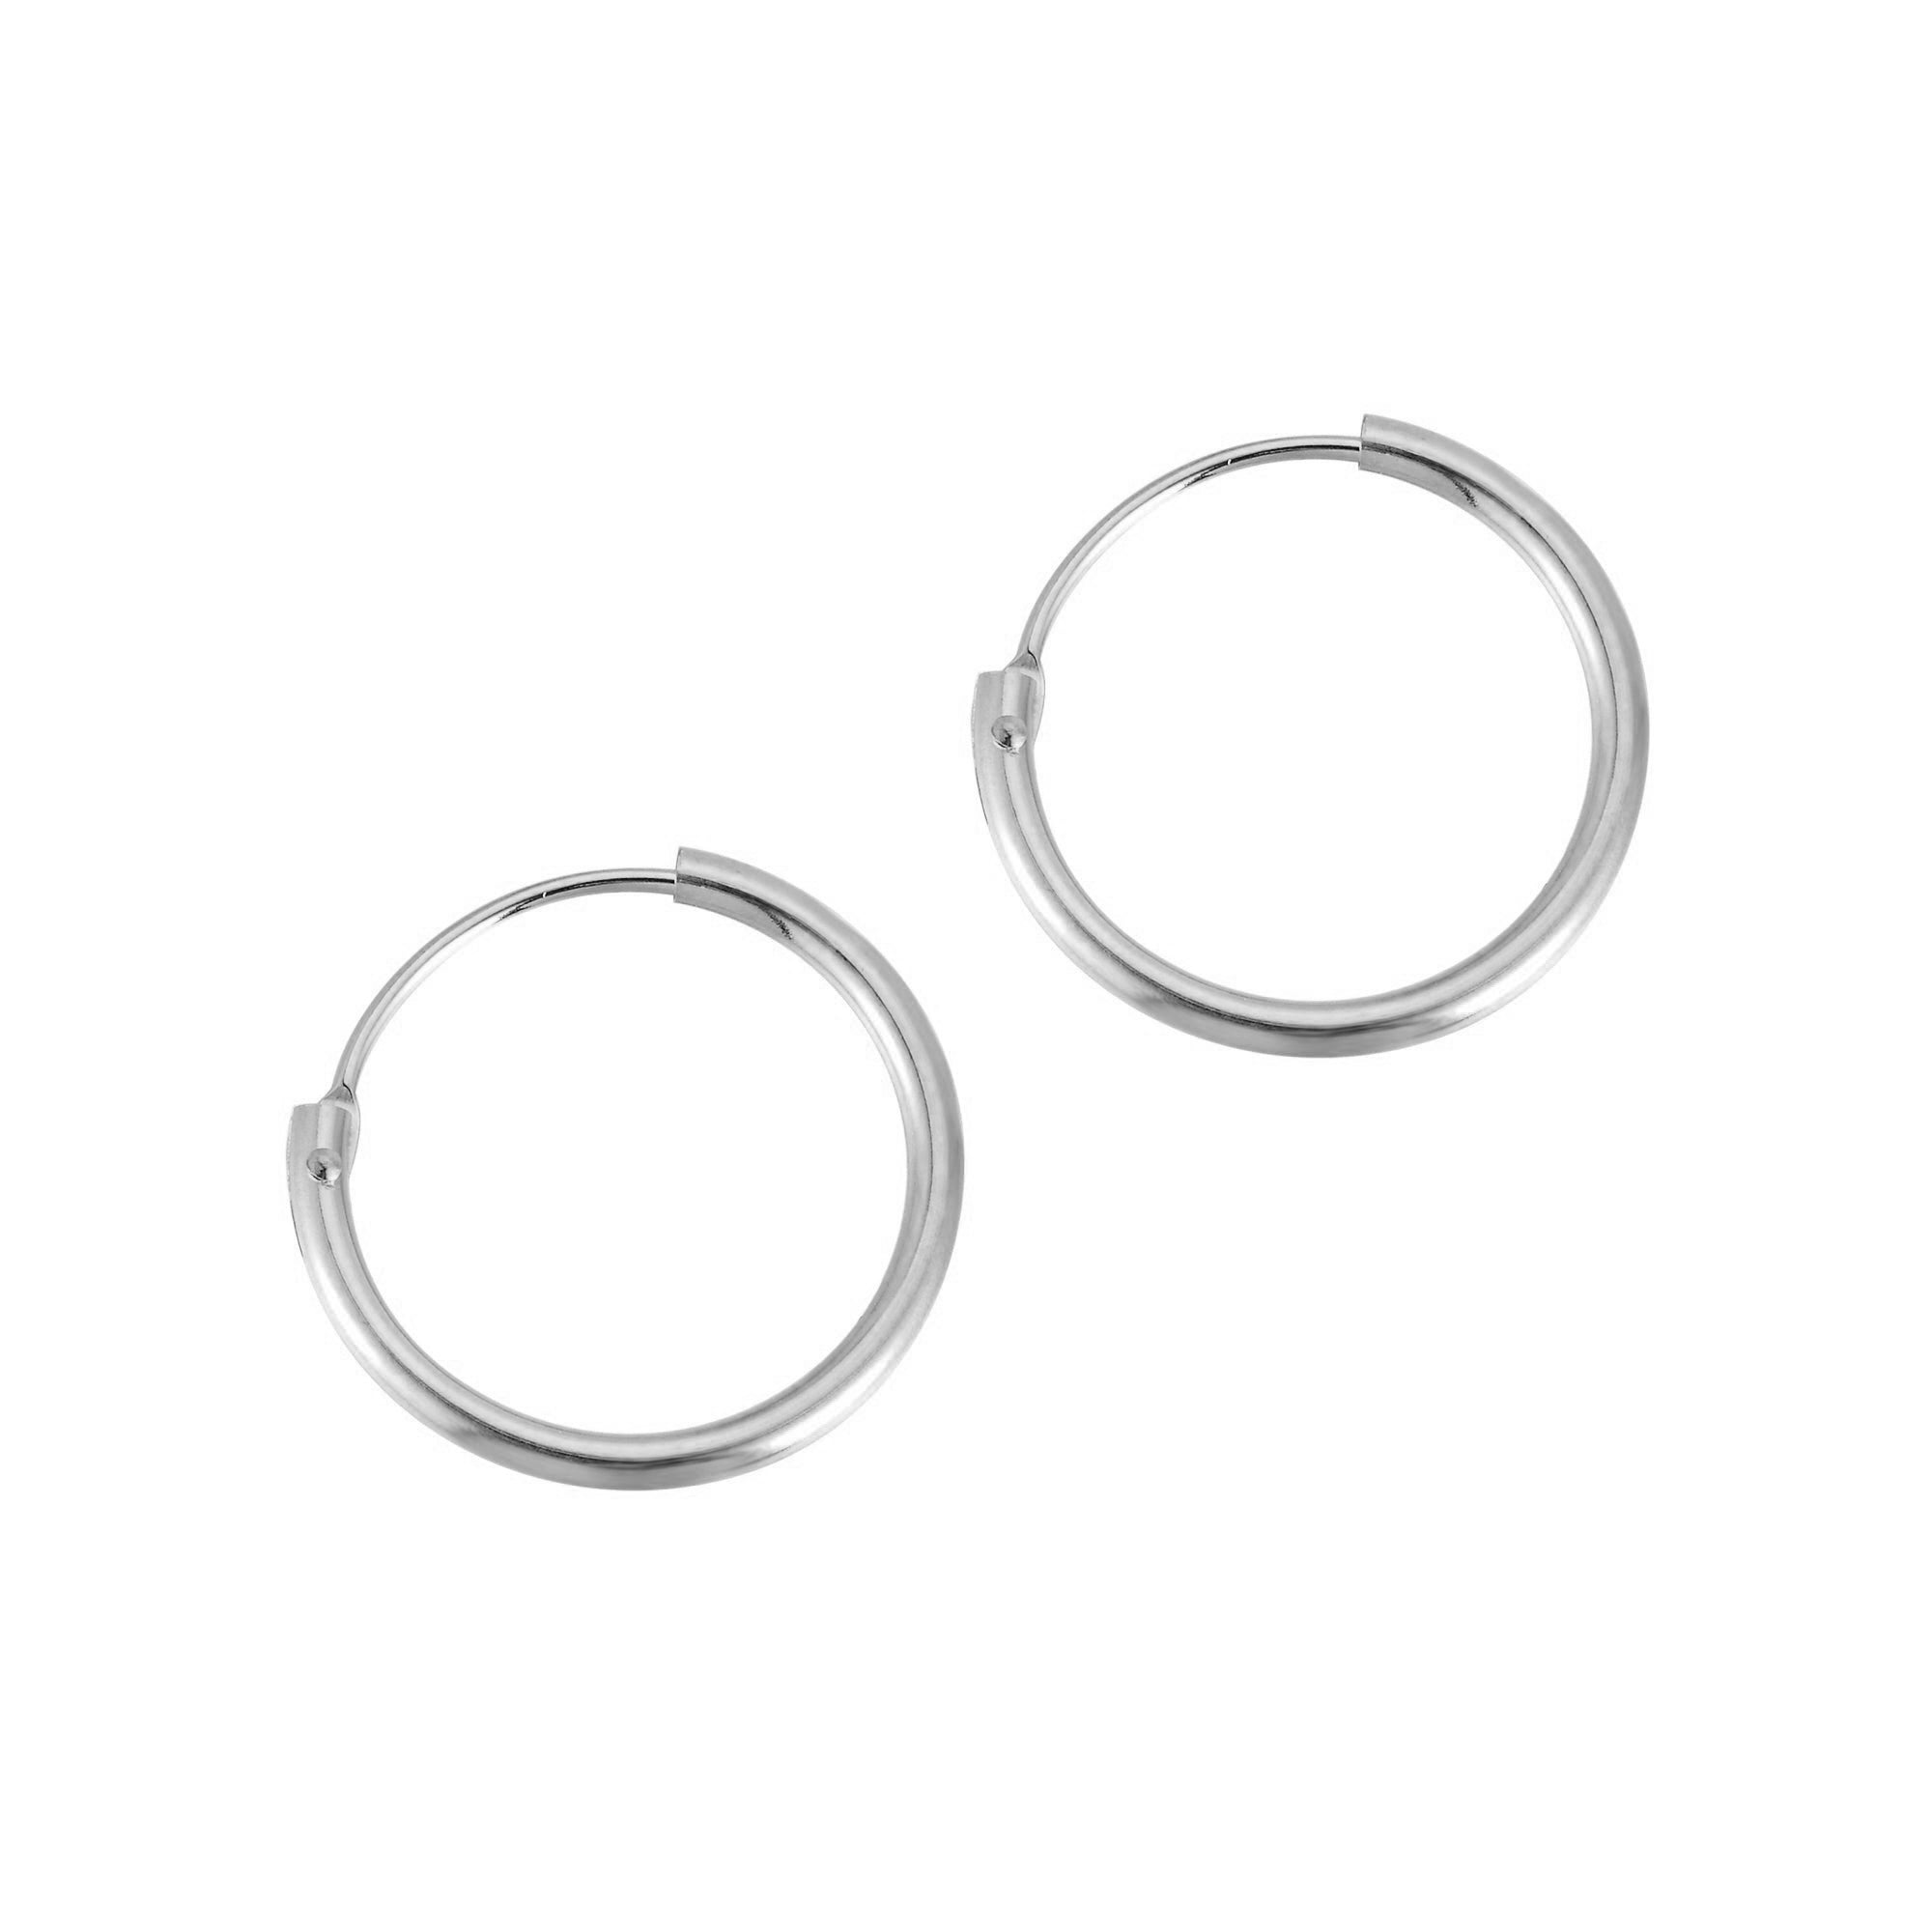 15mm 9ct Solid White Gold Plain Hoops - seolgold